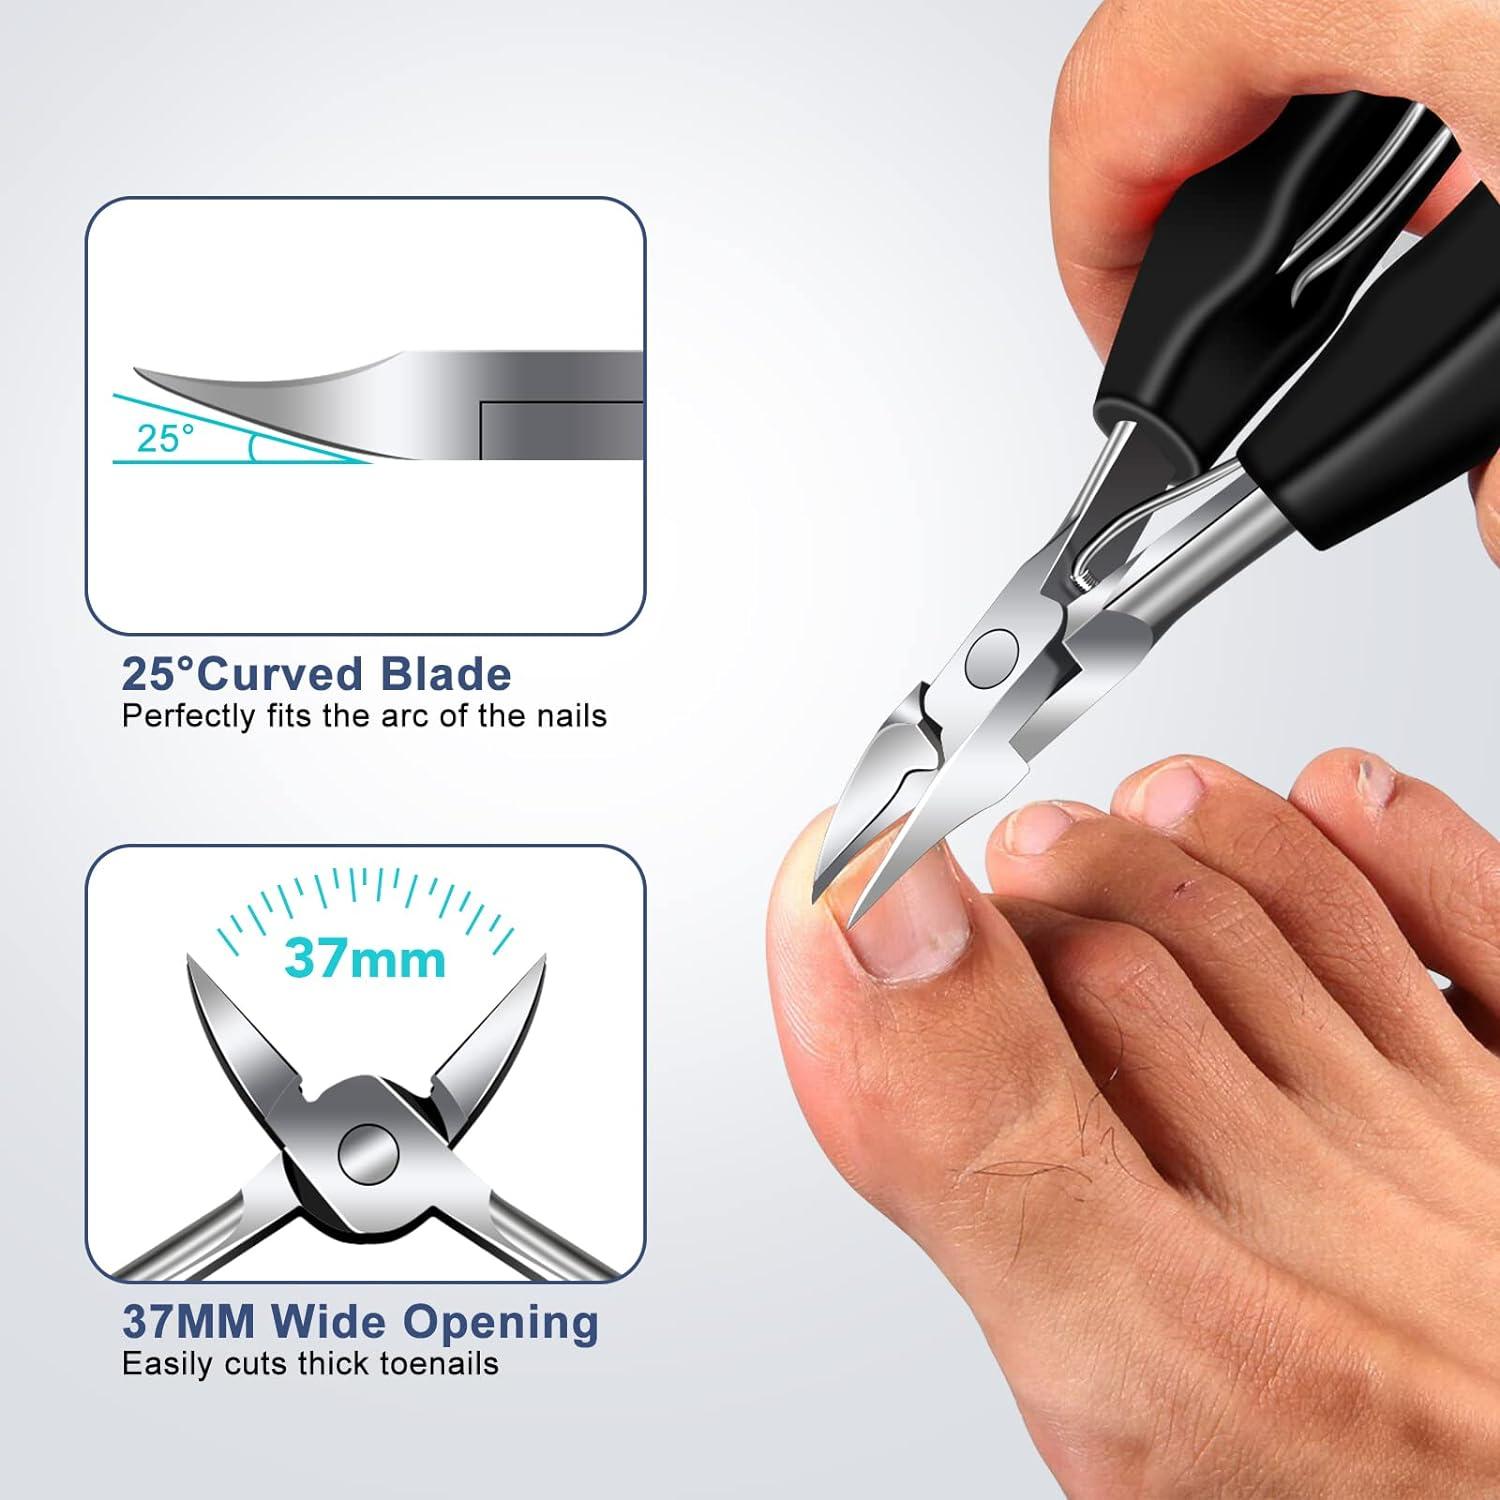 Get the world's best nail clippers for cutting thick toenails